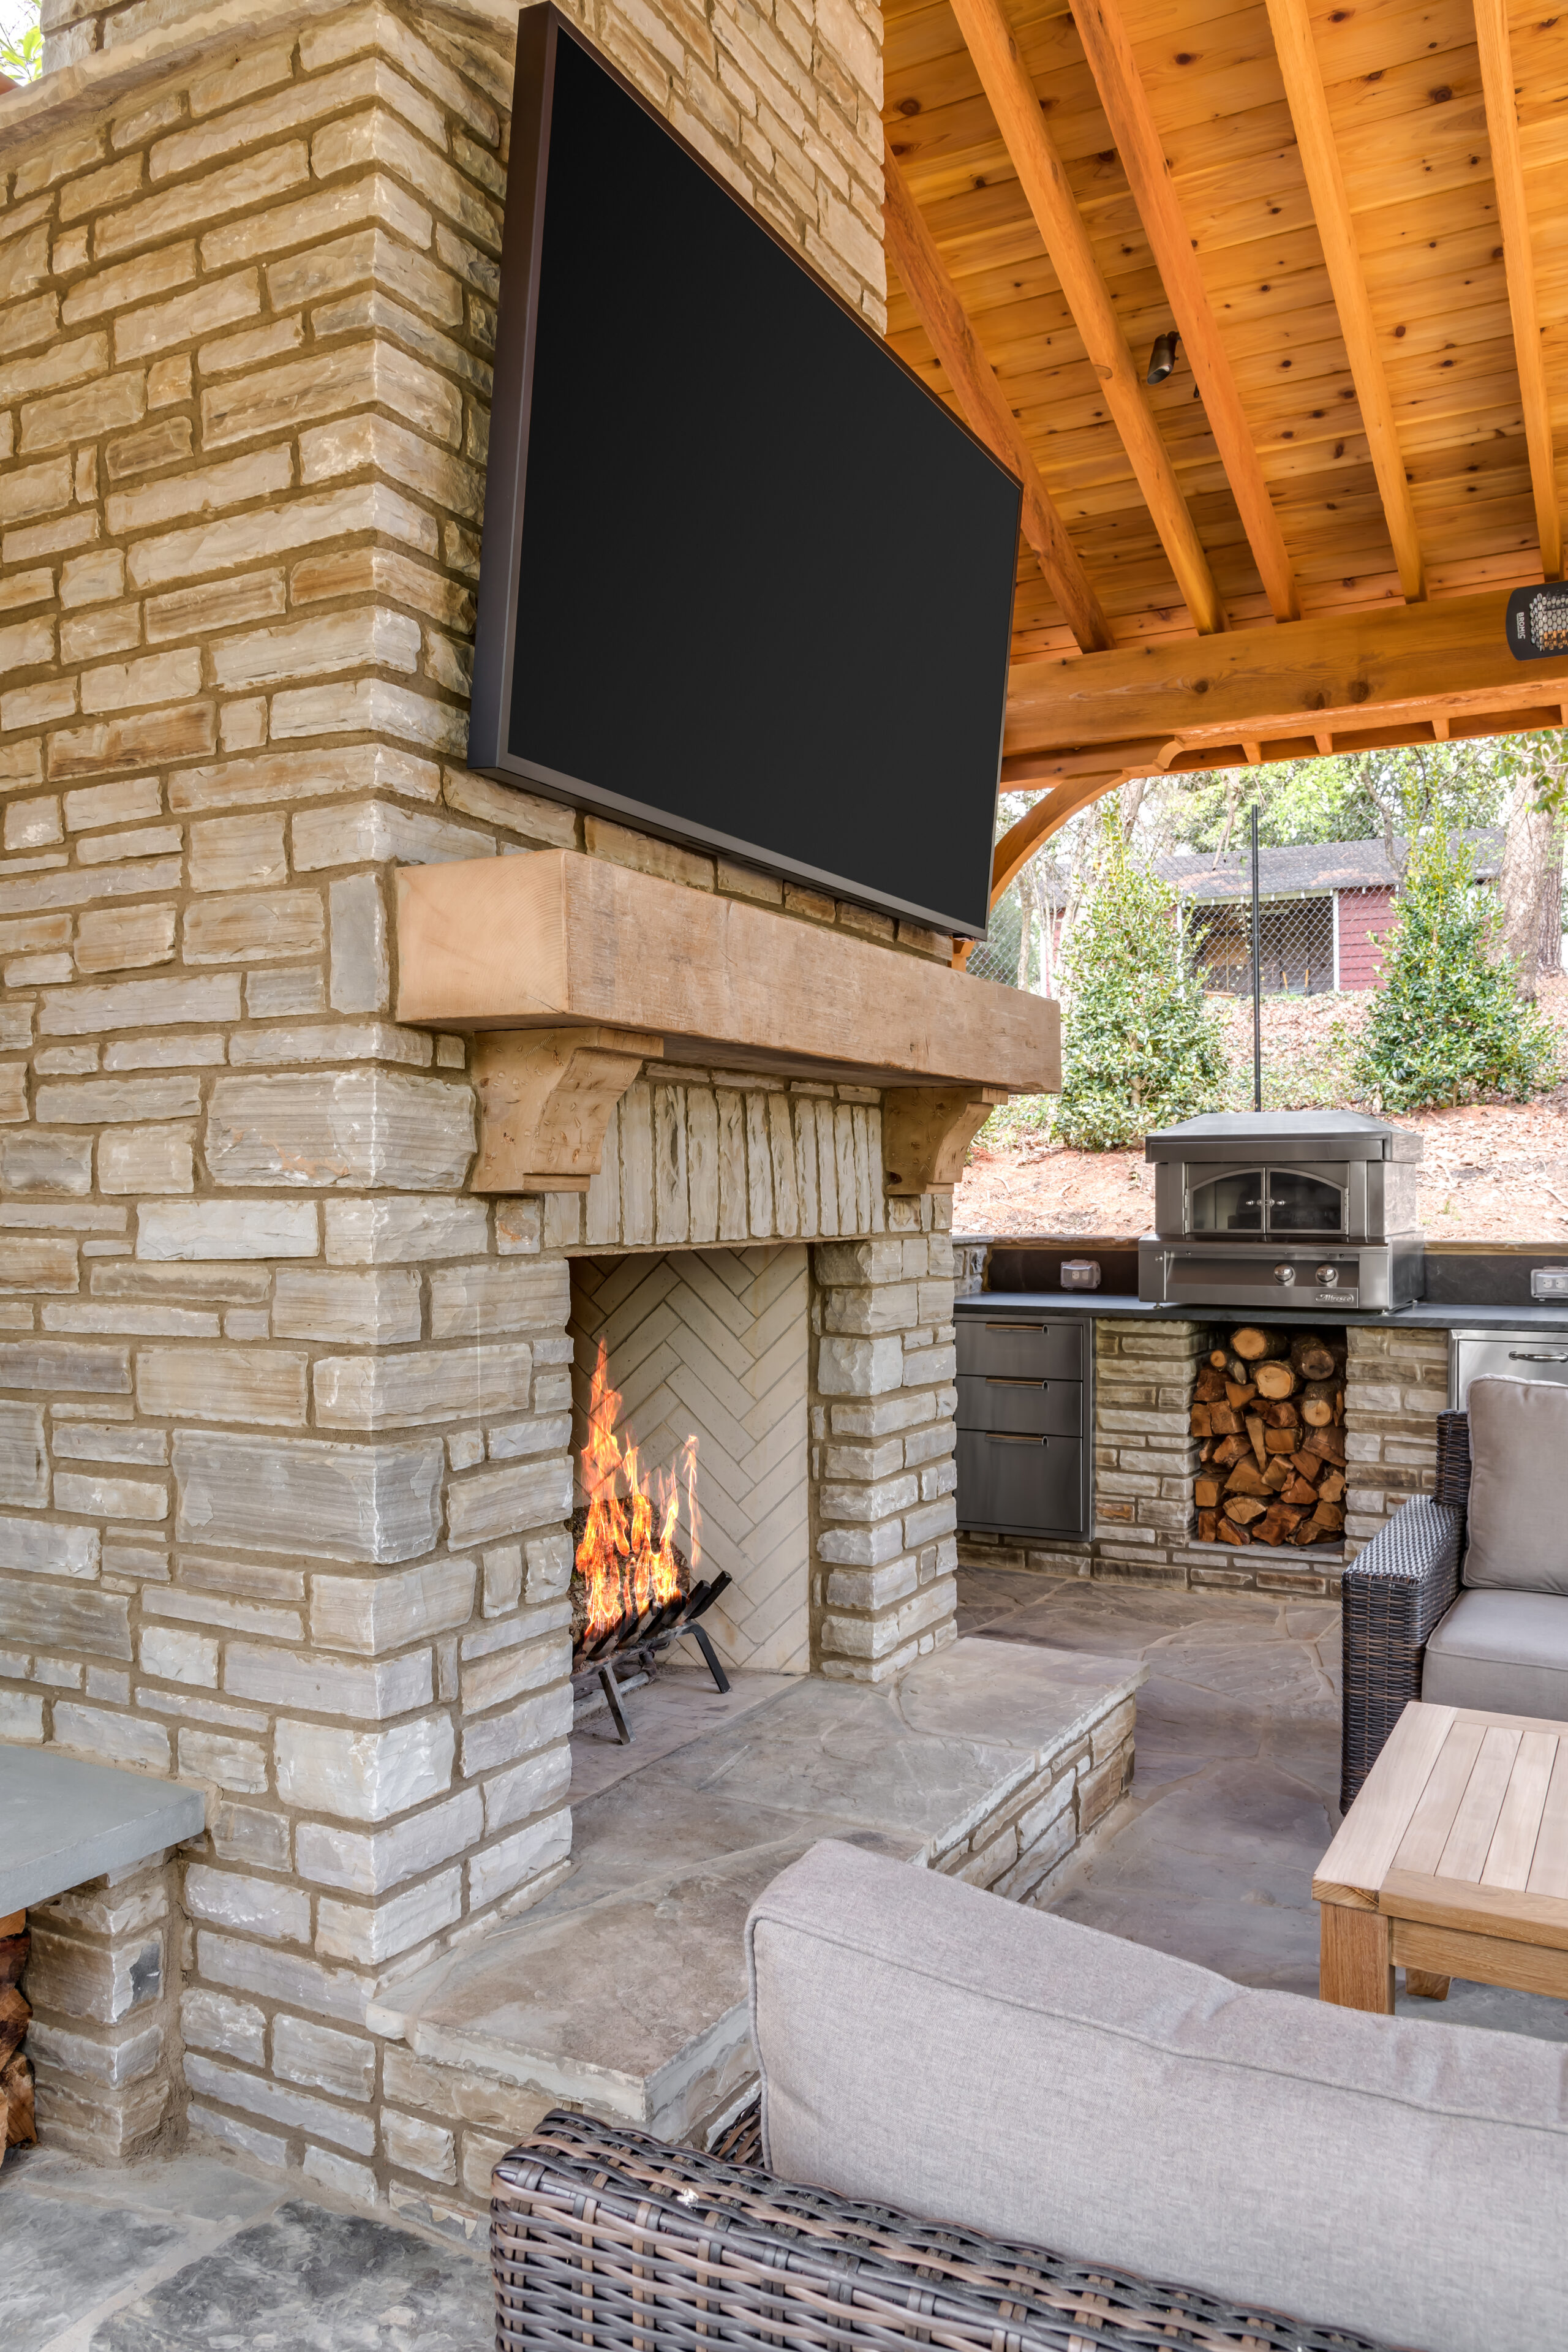 outdoor fireplace and tv in living area under cover